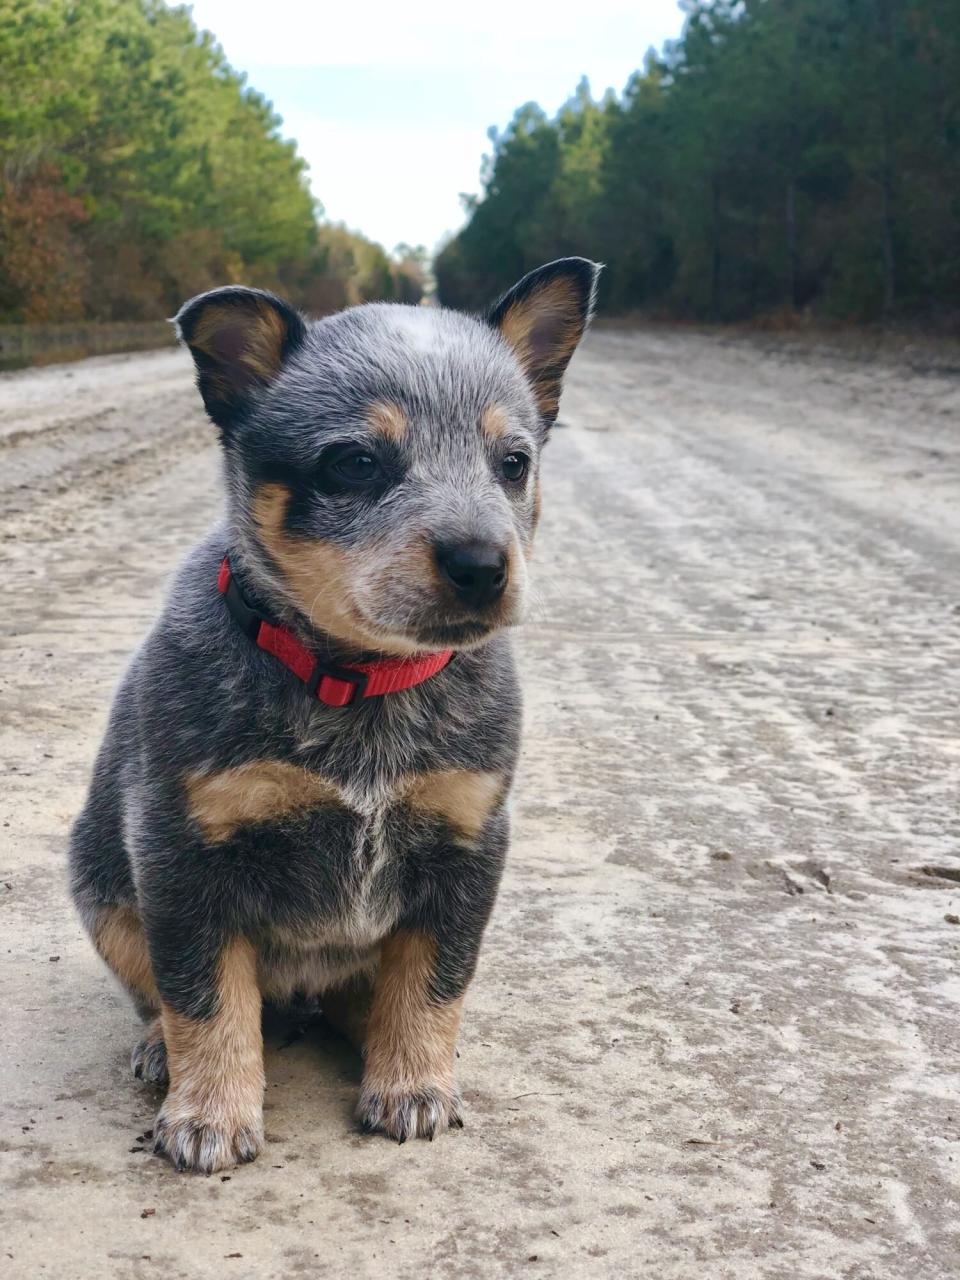 australian cattle dog puppy sits on dirt road